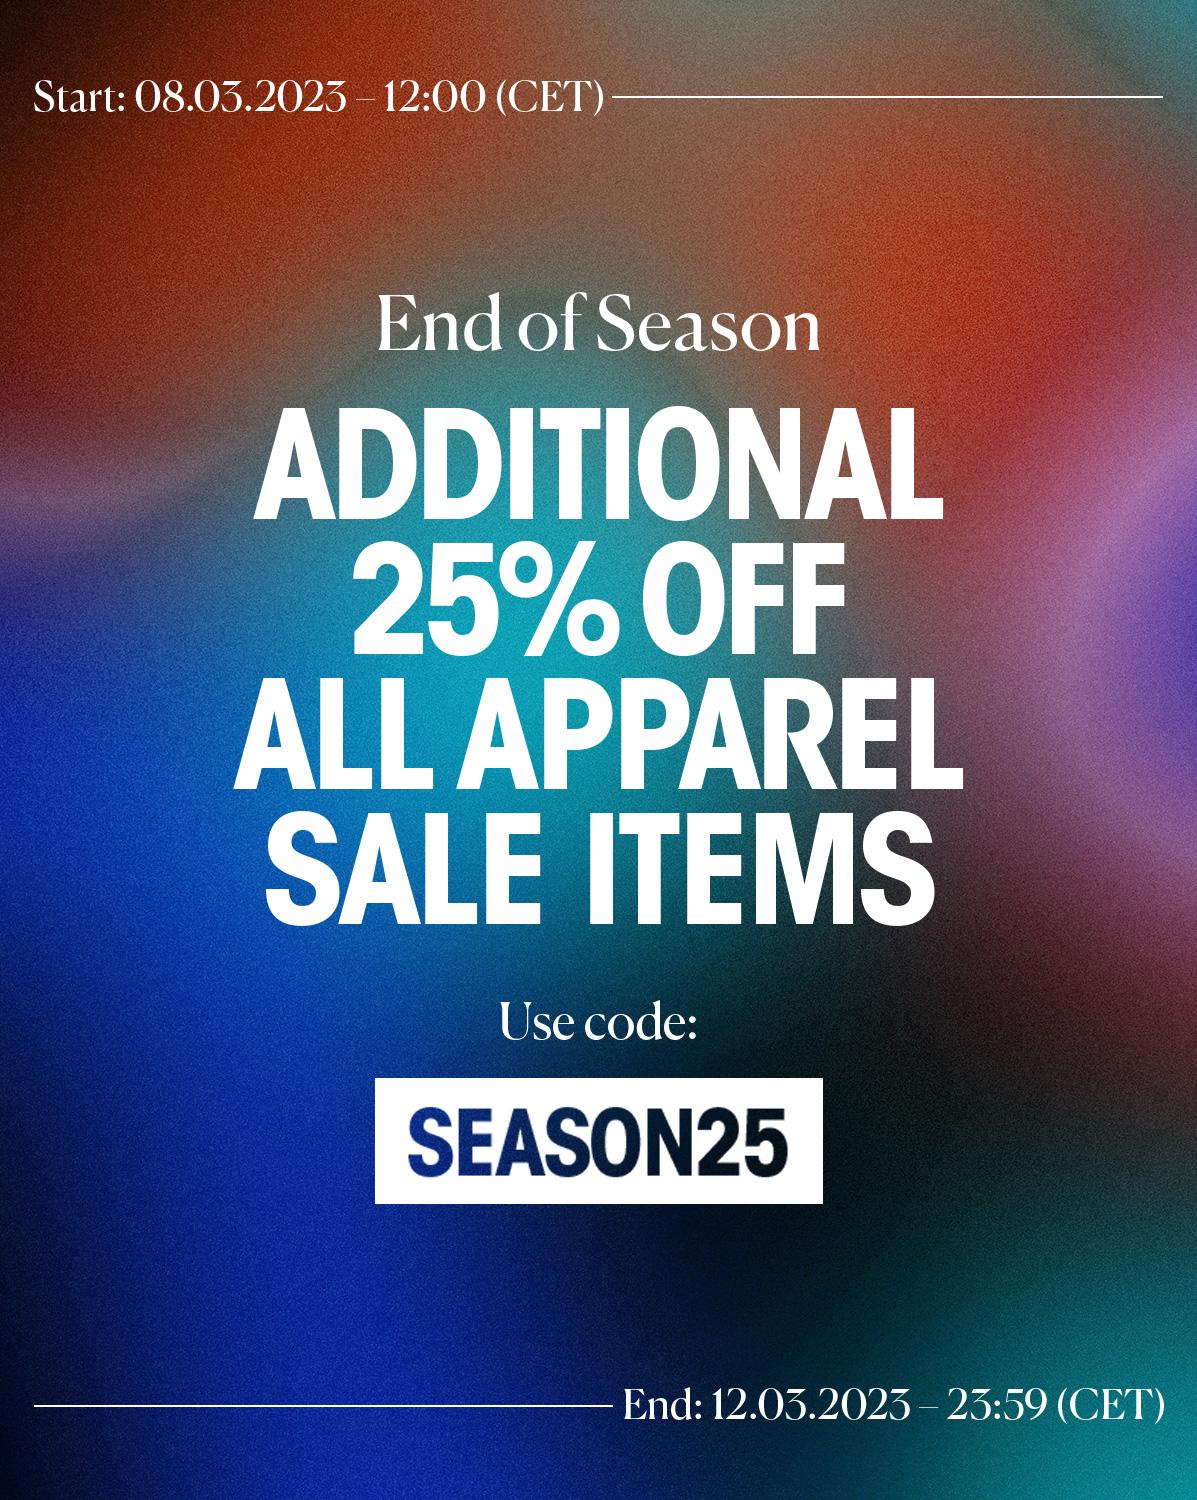 Text: Additional 25% off all apparel sale items